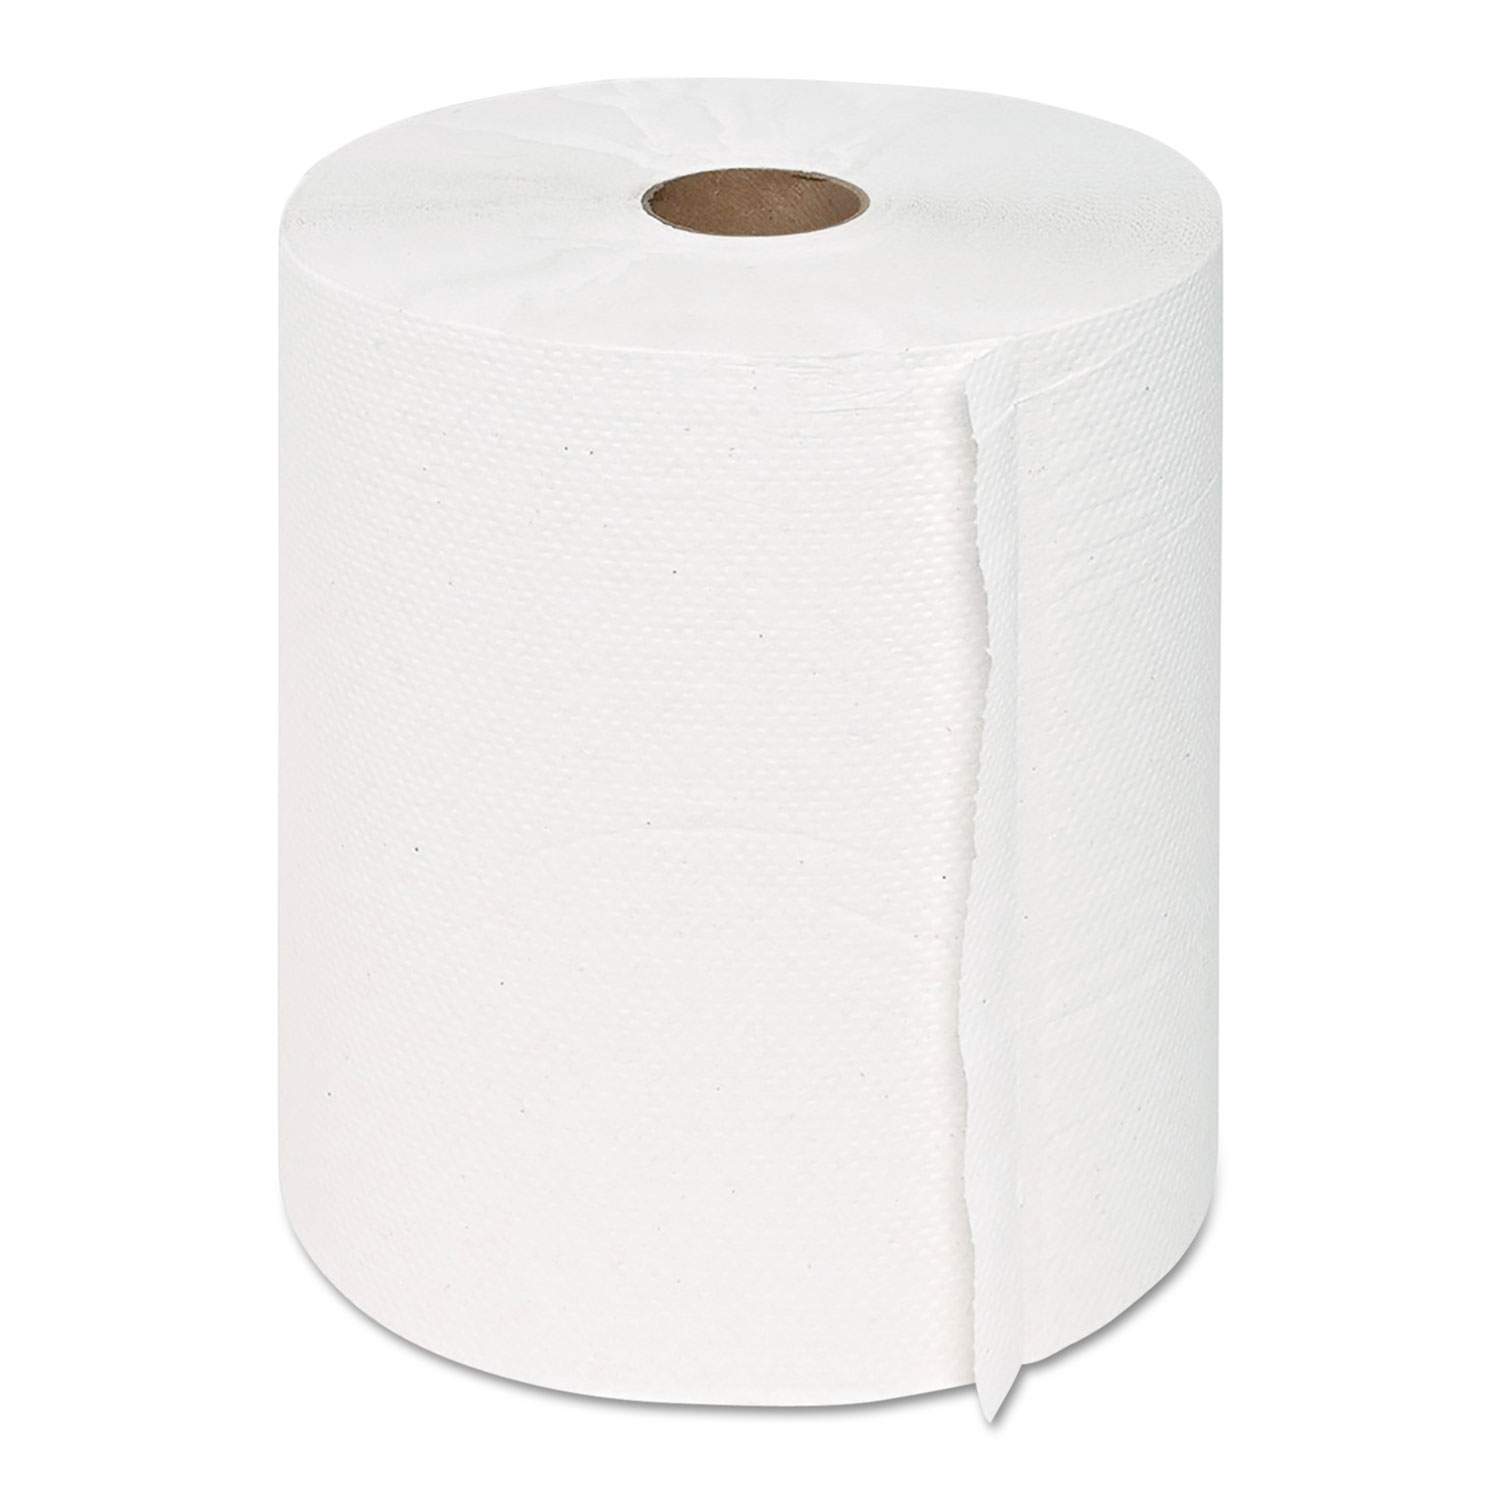 Hardwound Roll Towels, 1-Ply, White, 8 x 600 ft, 12 Rolls/Carton